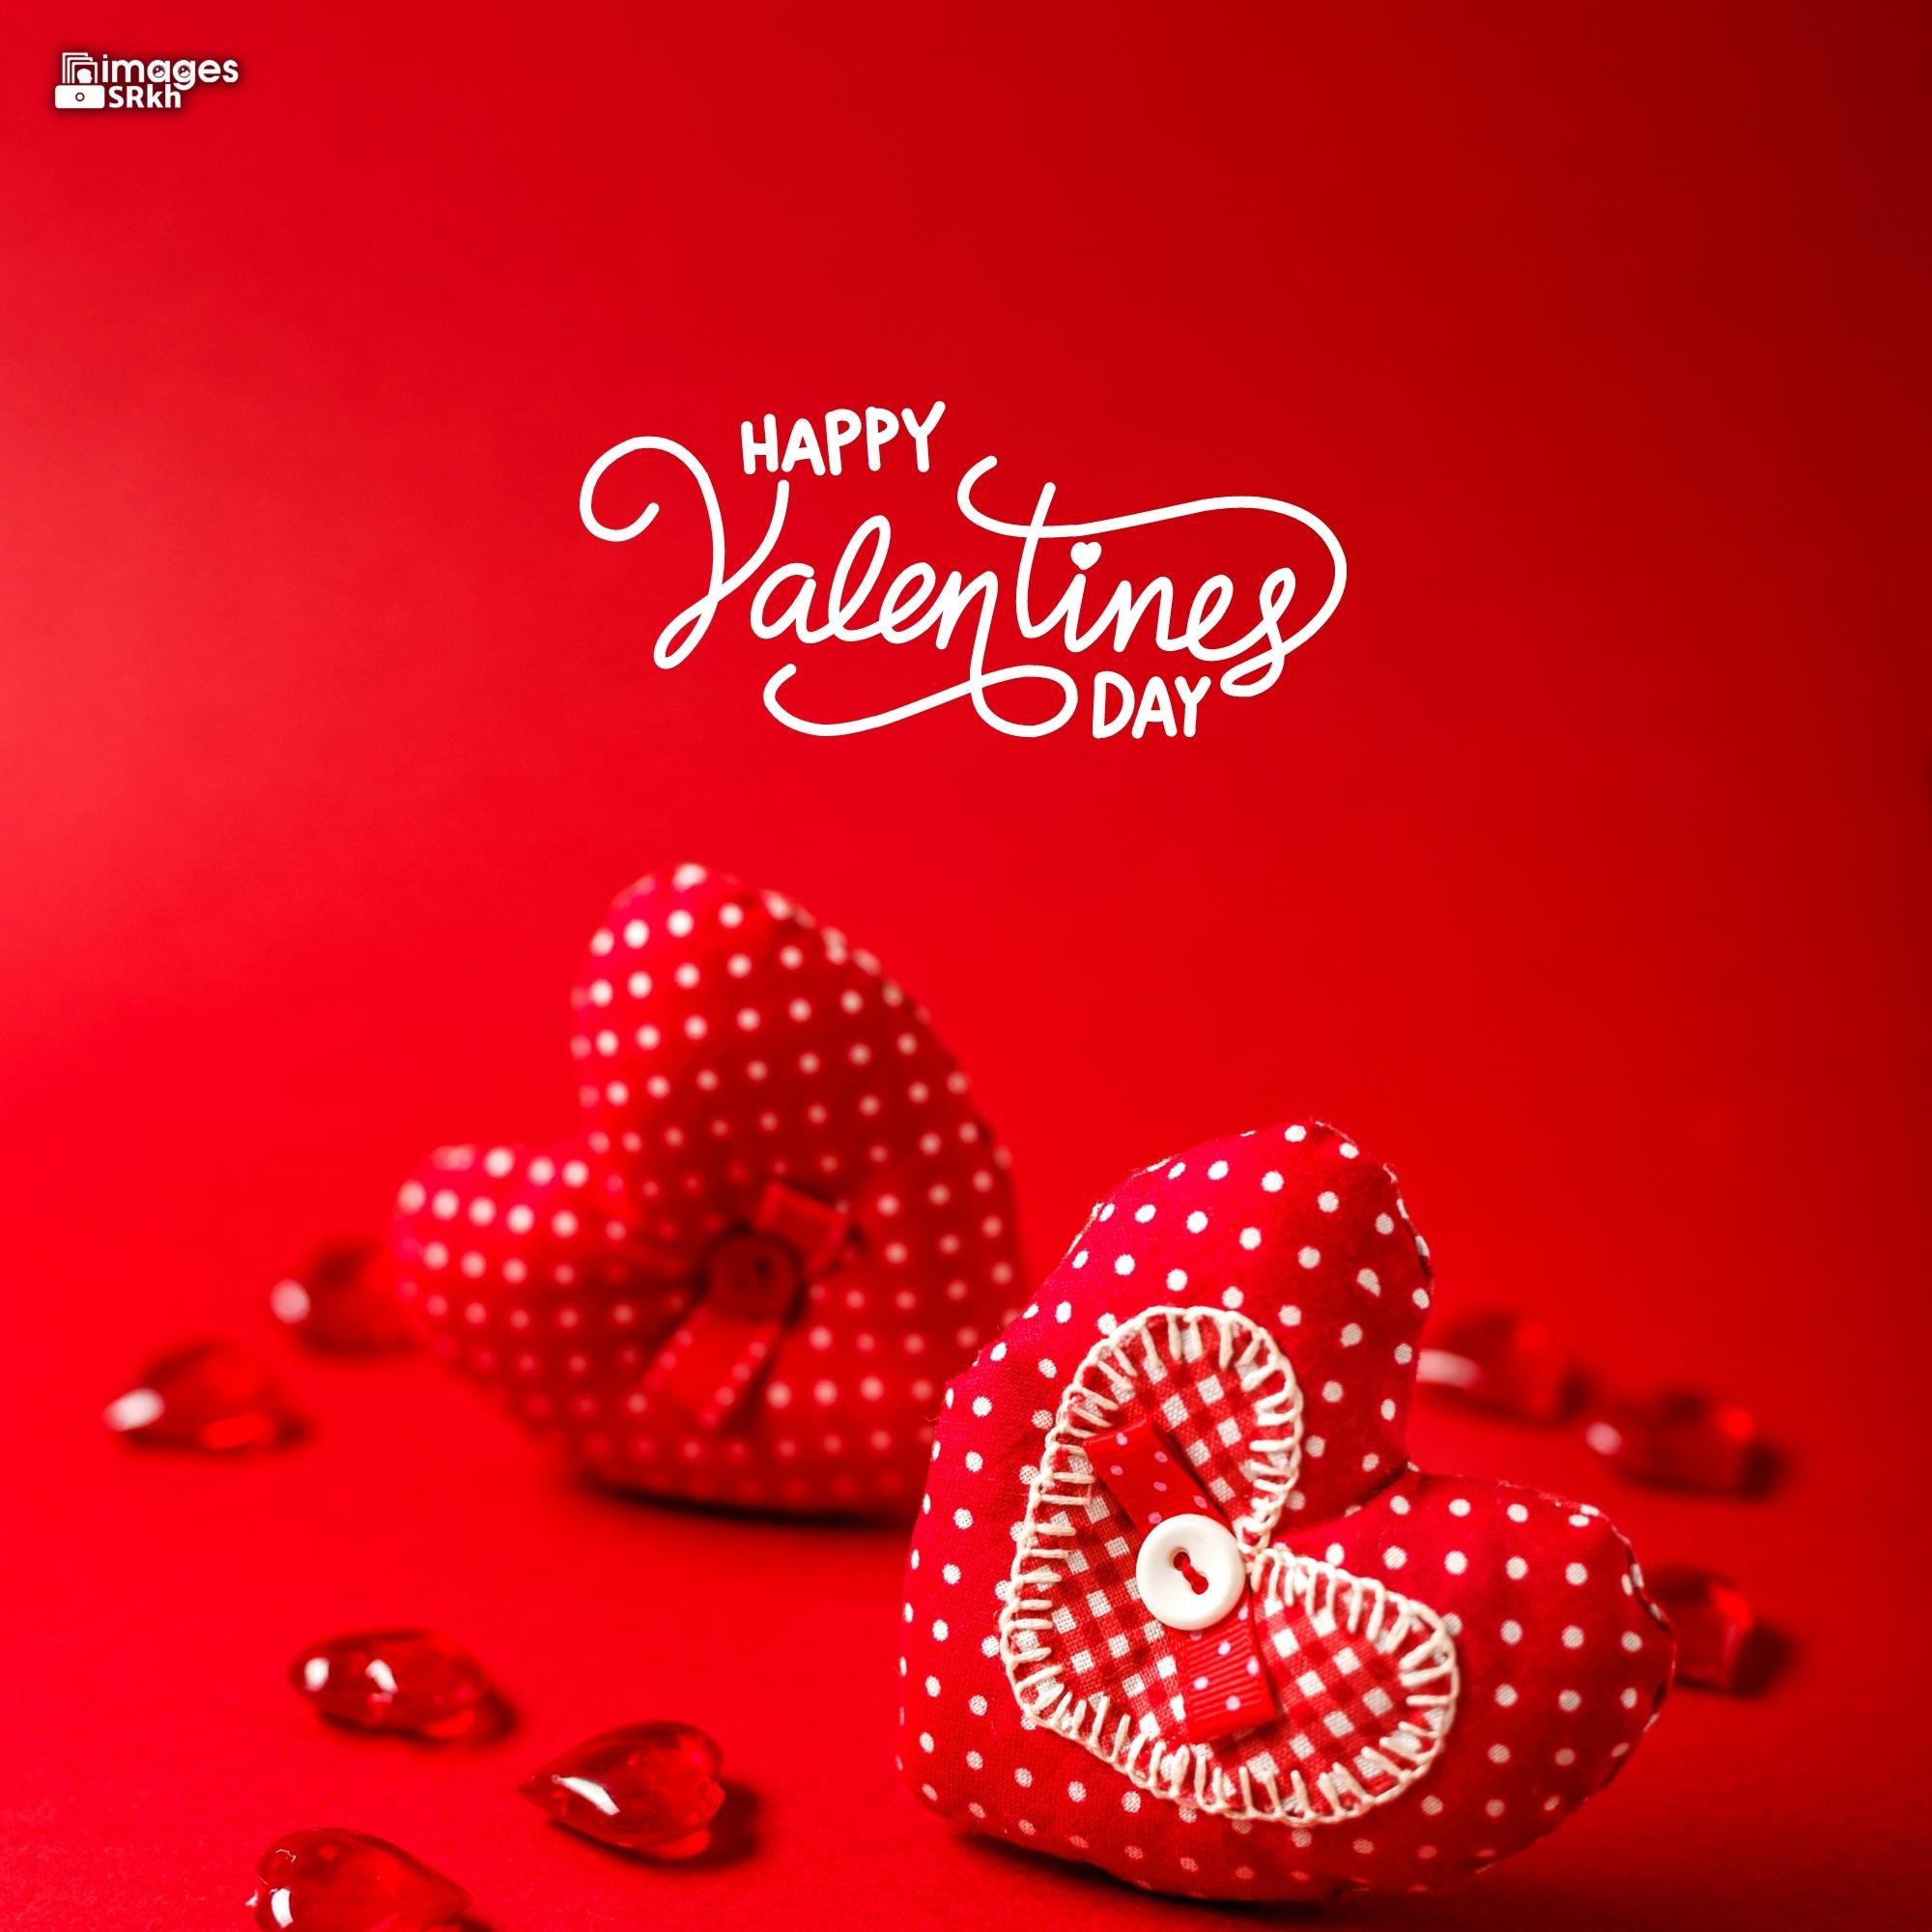 Happy Valentines Day | 533 | PREMIUM IMAGES | Wishes for Love